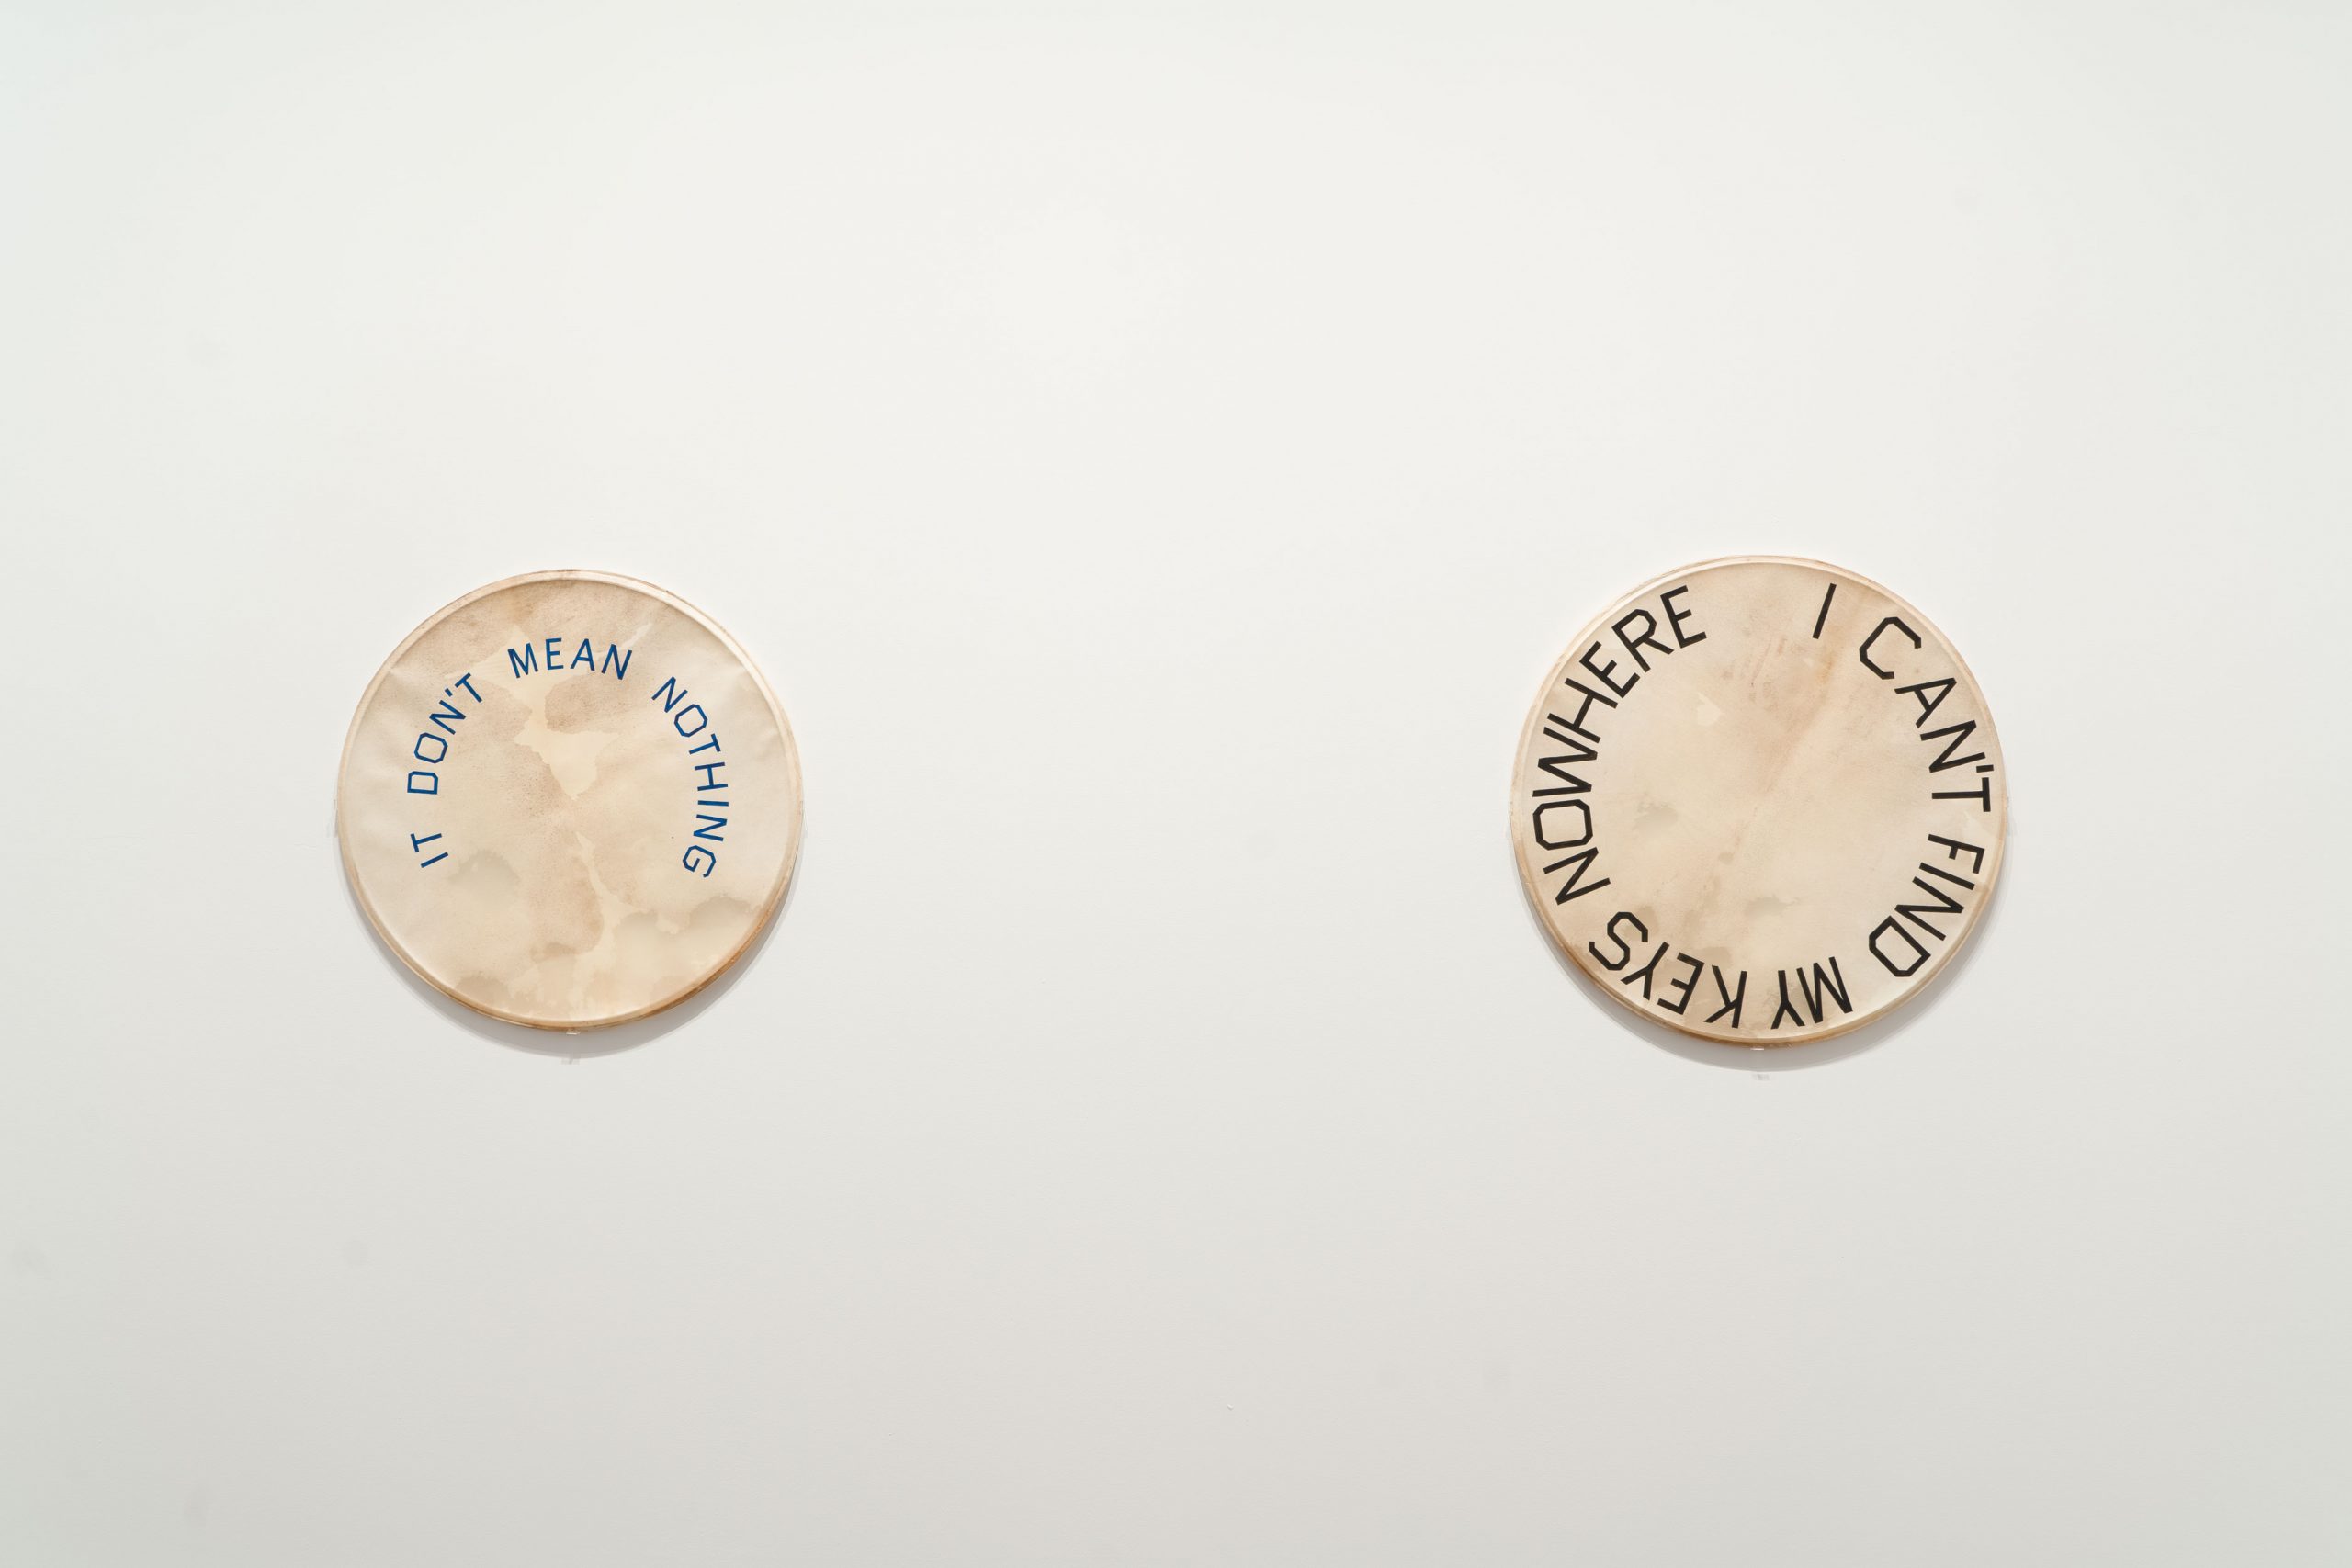 Photo of two drum skins hanging on the wall with writing on, taken during the installation of Ed Ruscha: Drum Skins exhibition at the Blanton Museum of Art.